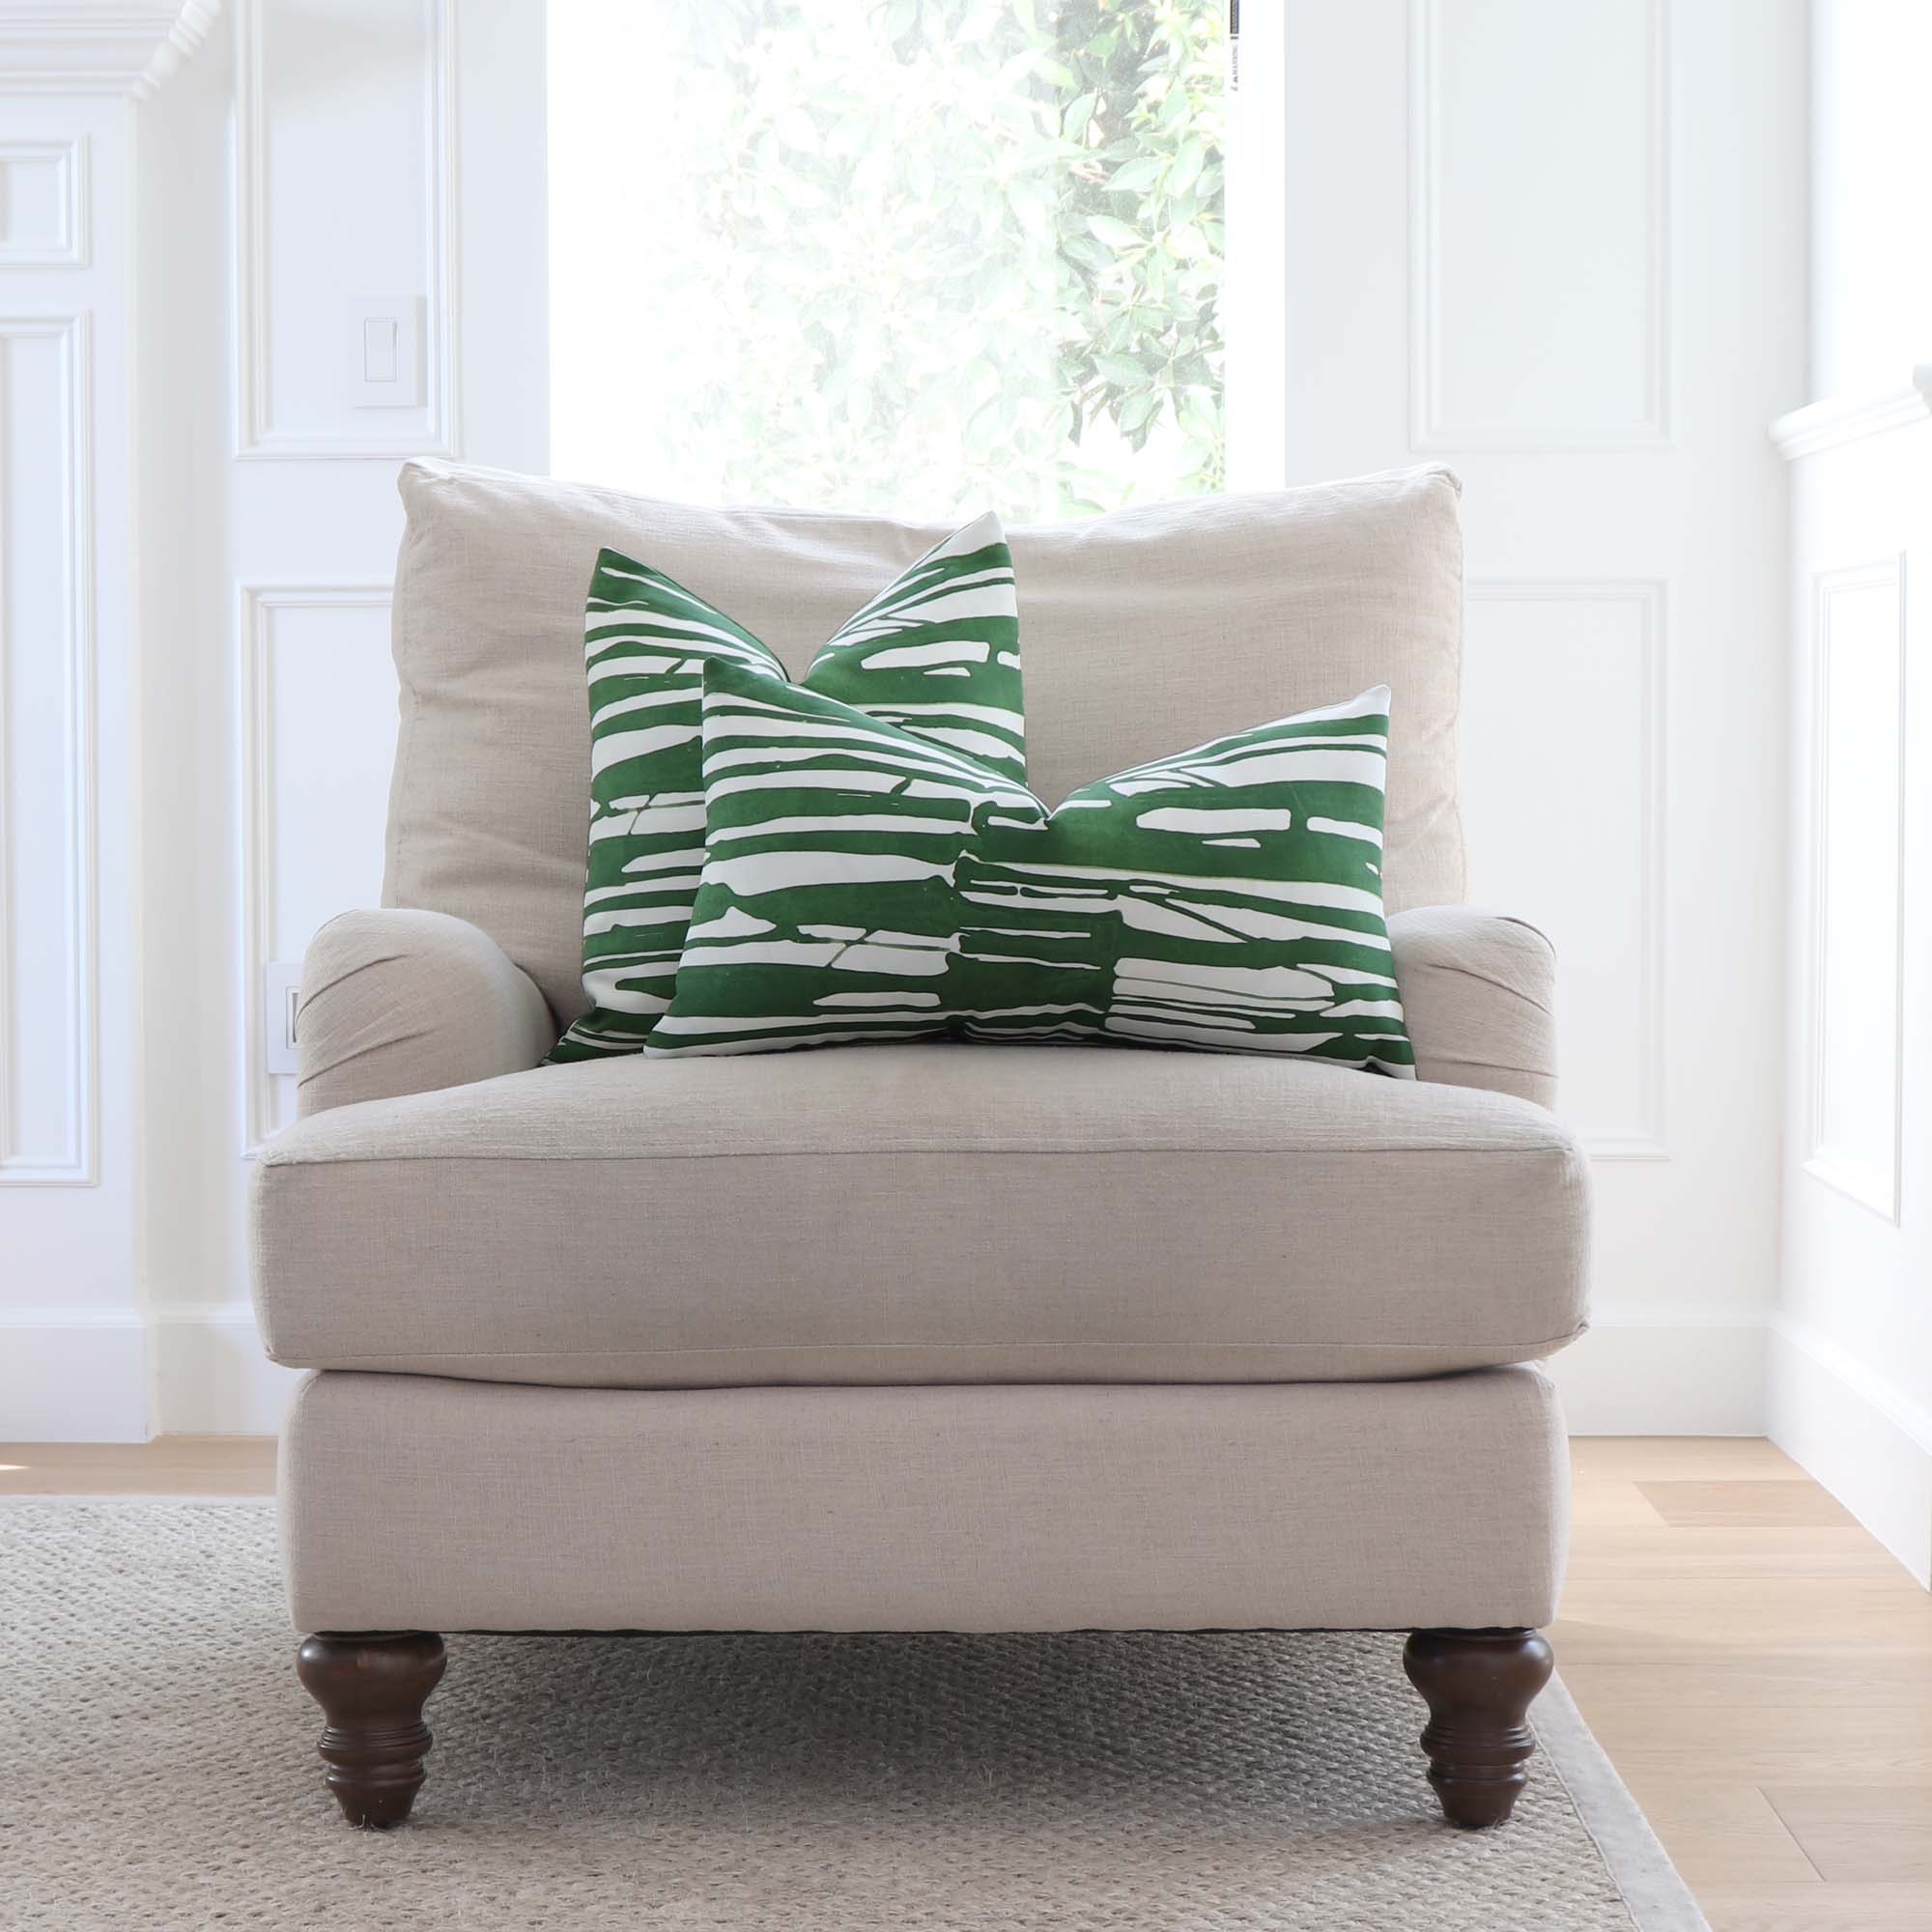 Thibaut Ischia Stripe Emerald Green and White Designer Throw  Pillow Cover on Arm Chair in Living Room